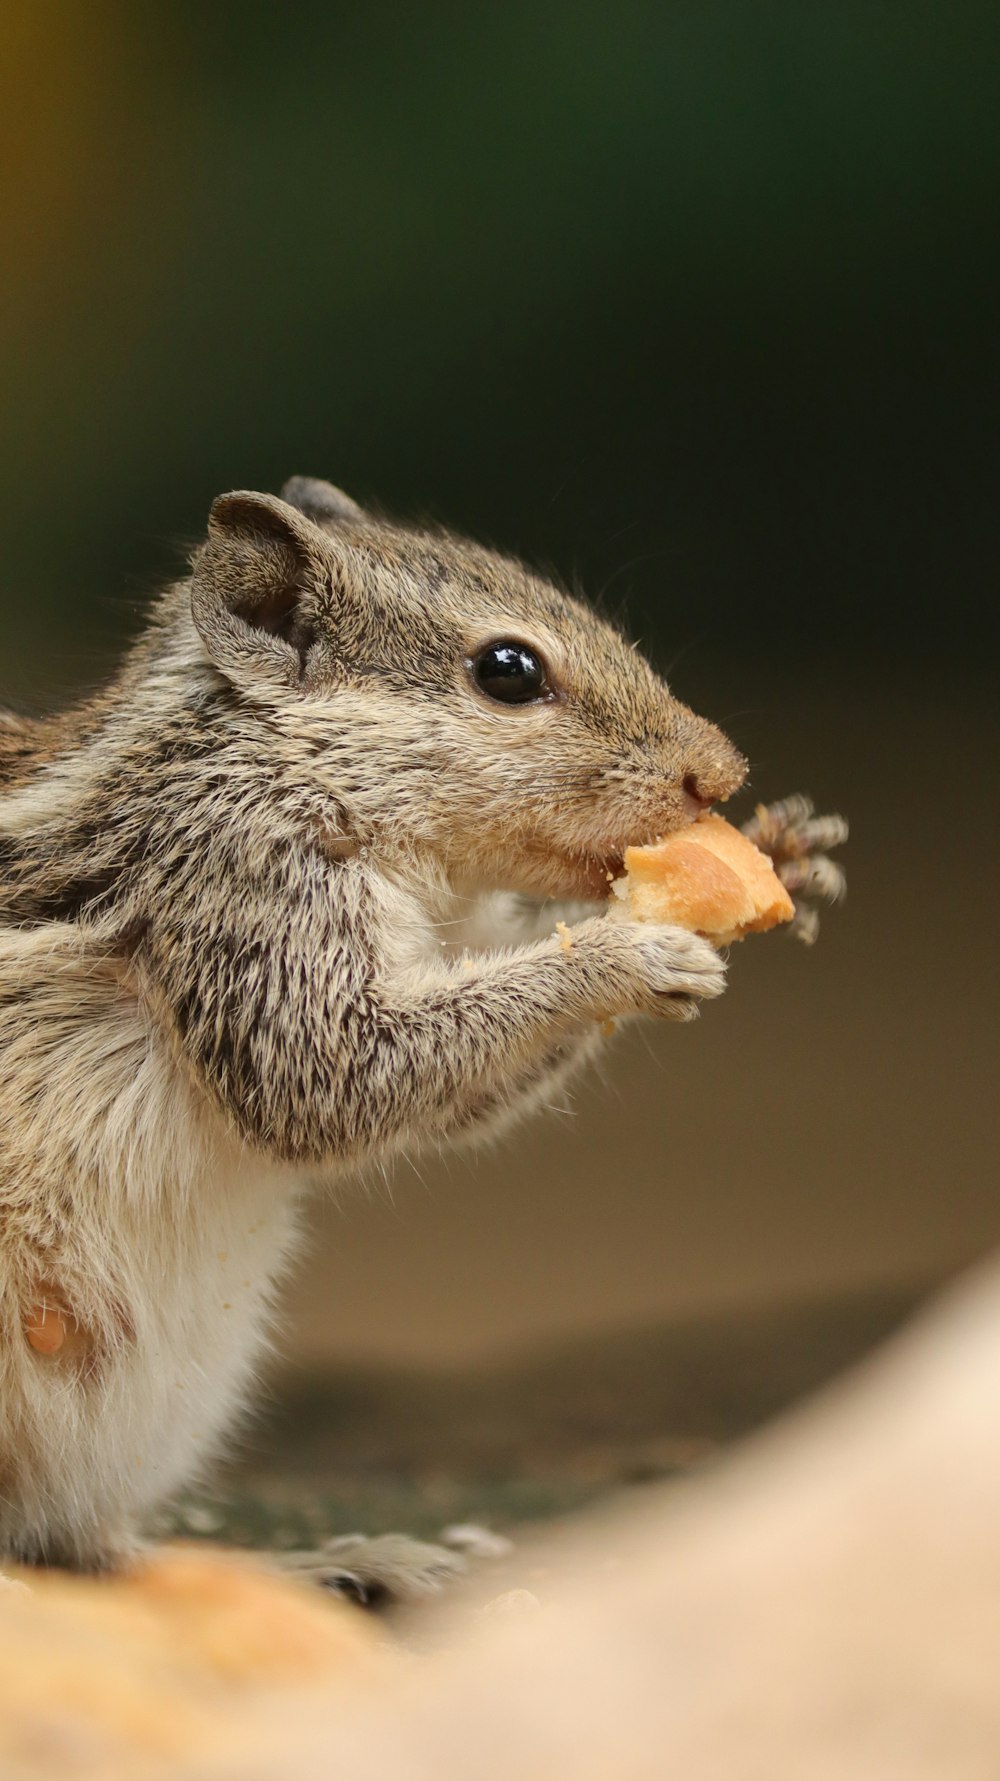 a small rodent eating a piece of bread